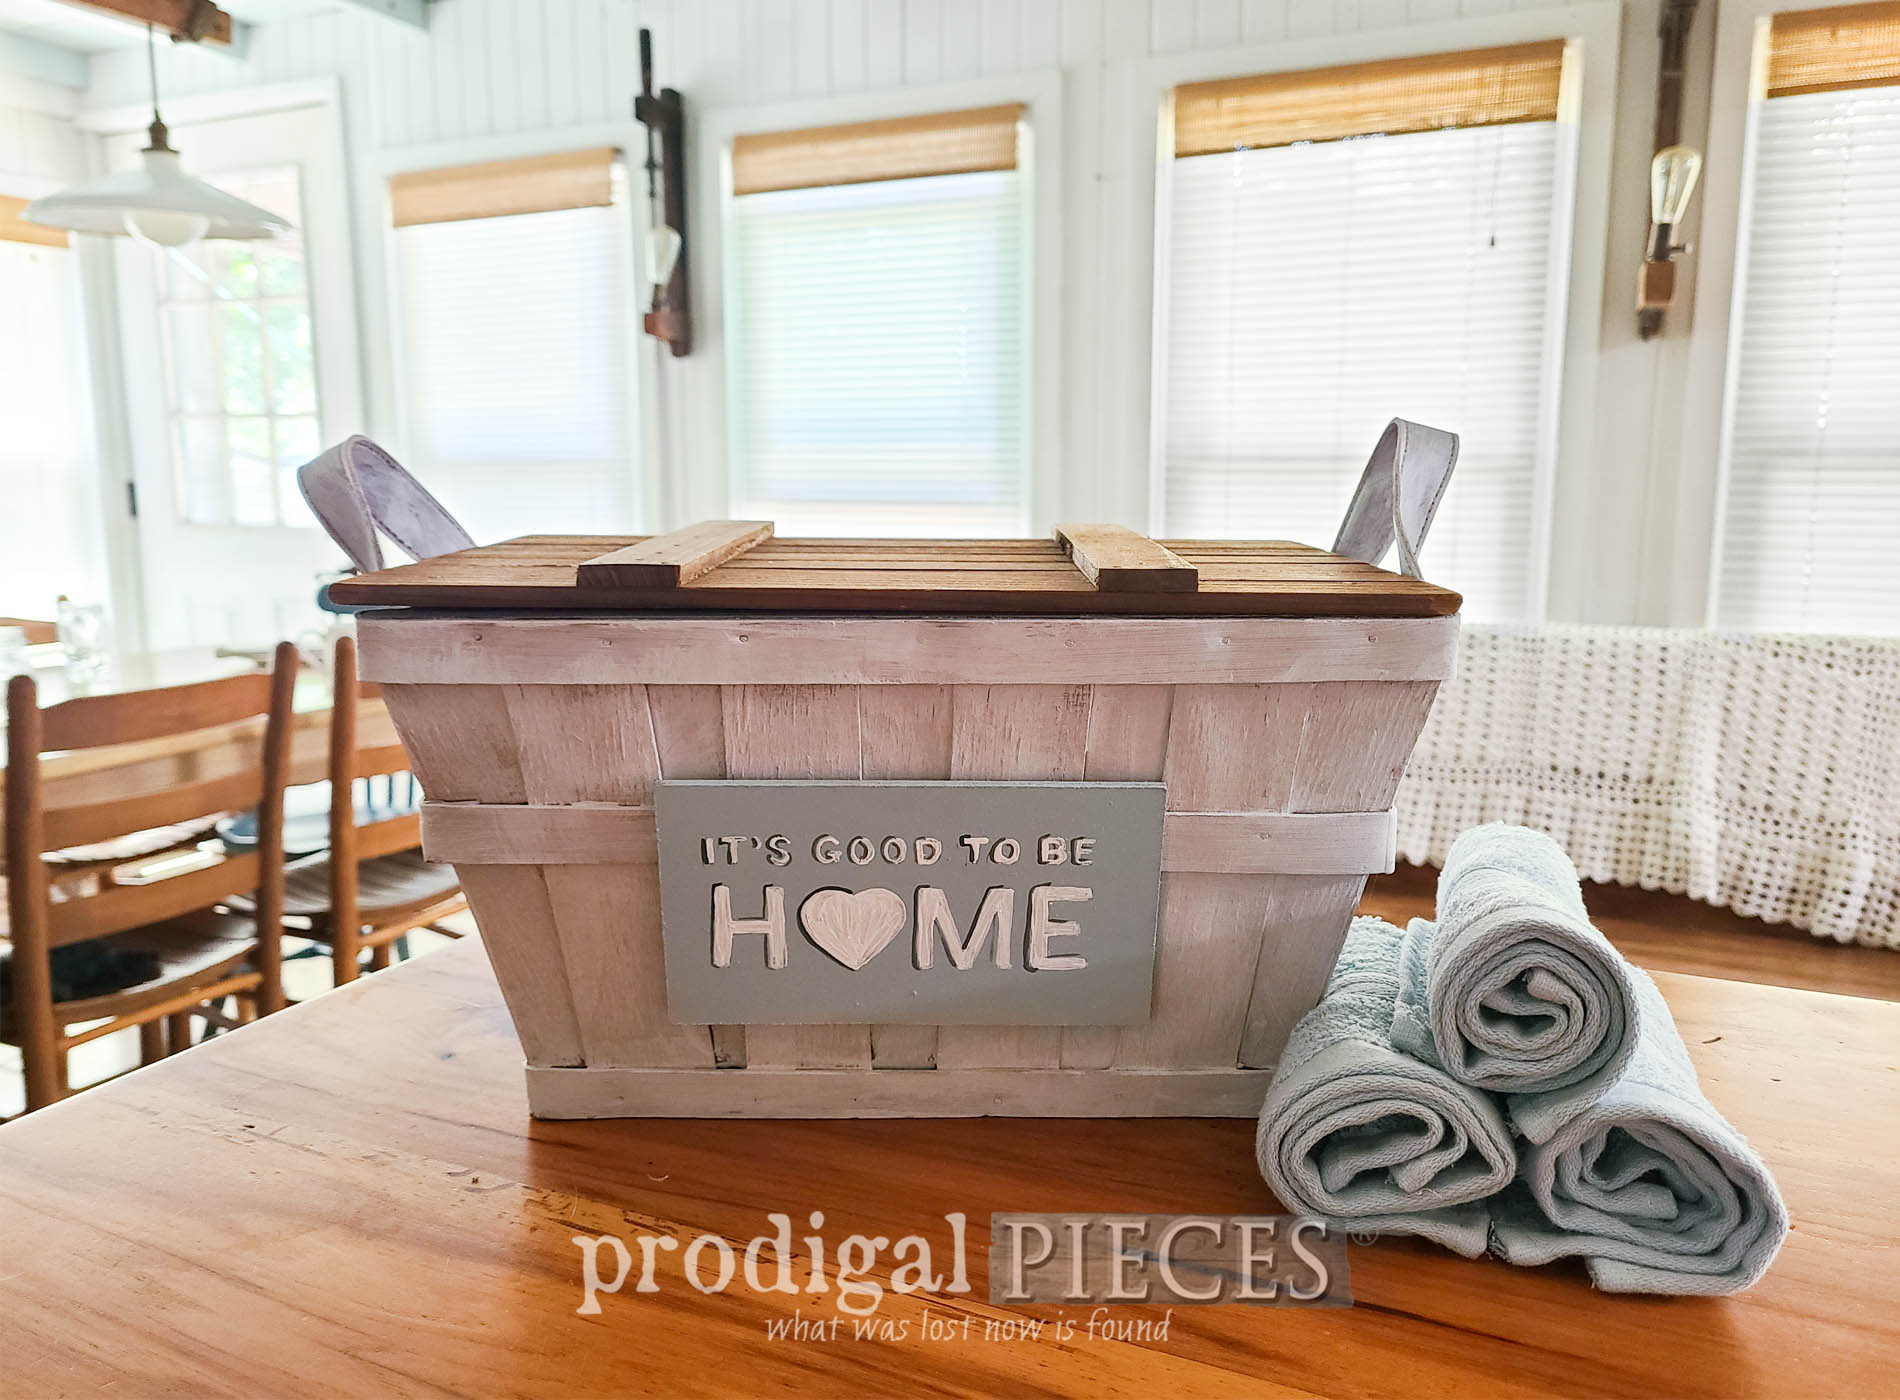 Featured Thrifted Basket for DIY Housewarming Gift by Larissa of Prodigal Pieces | prodigalpieces.com #prodigalpieces